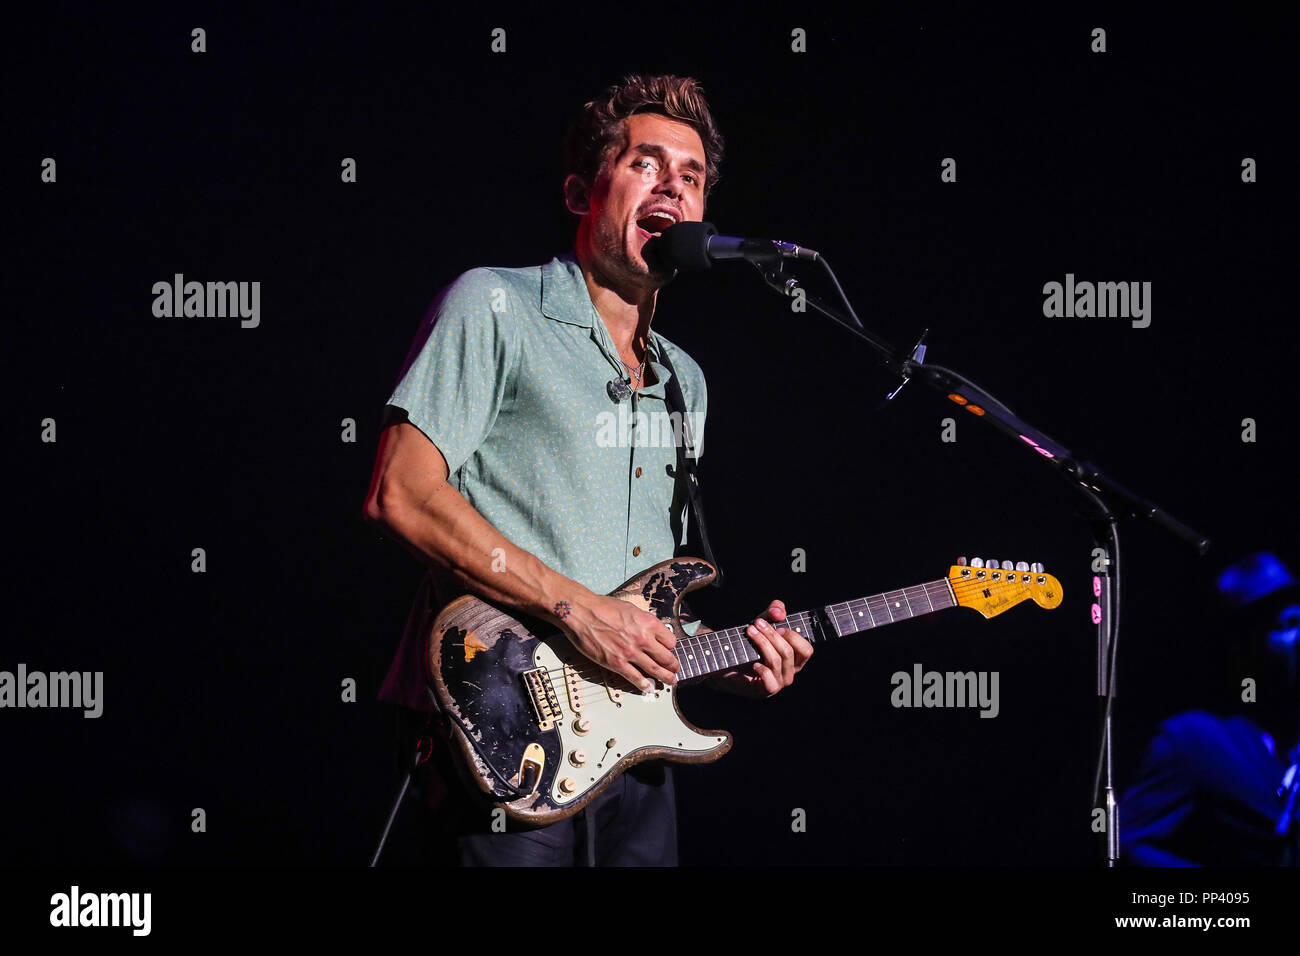 Music Artist JOHN MAYER performs in North Carolina as part of his 2017 Tour.   John Clayton Mayer is an American singer-songwriter, guitarist, and record producer. Stock Photo